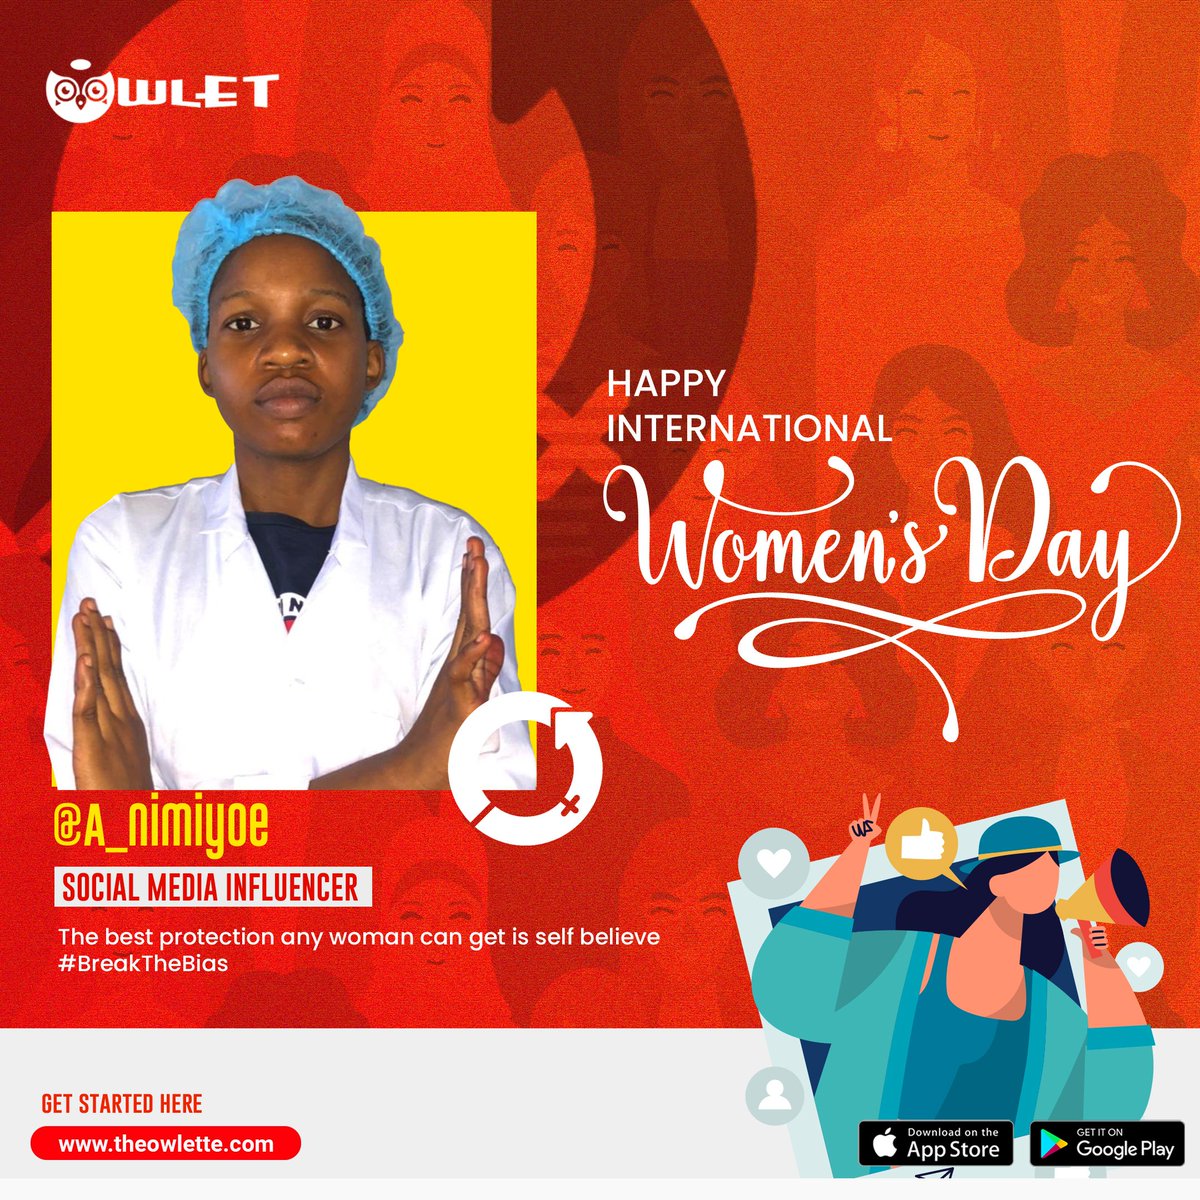 Its international women's Day and as usual the champion Owlet joined the world in celebrating Women's Day.

However, one of @theowlette team @A_Nimiyoe, who is also an influencer says 'The best protection any woman can get is self believe'

#OwletIWD
#BreakingTheBias